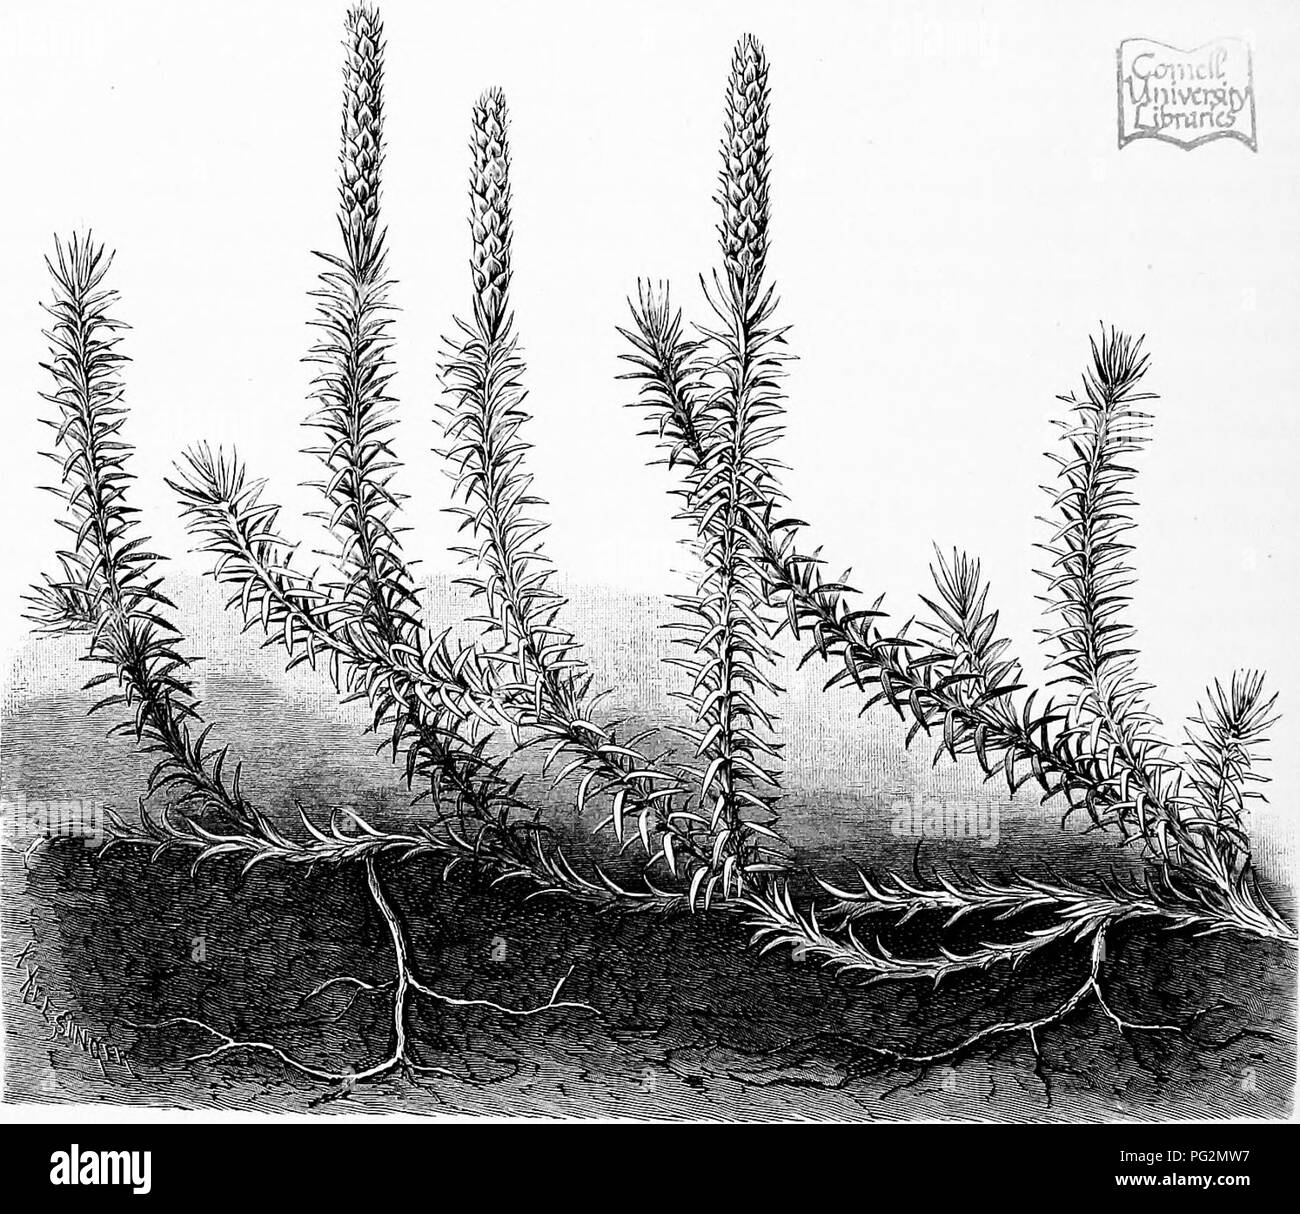 . The natural history of plants, their forms, growth, reproduction, and distribution;. Botany. 714 THE SUBDIVISIONS OF THE VEGETABLE KINGDOM. the latter their condition parallels that of the Hydropterides. Lepidodendracese and SigillariacesB are represented by fossil forms only. LycopodiacecB.—The Club-mosses proper include some 100 species, distributed over various parts of the globe. The habit of a typical Lycopodium is indicated in the accompanying figure of L. annotinuTn, with its branching stem closely set with simple, scale-like leaves and terminal cones. The species common in mountain r Stock Photo